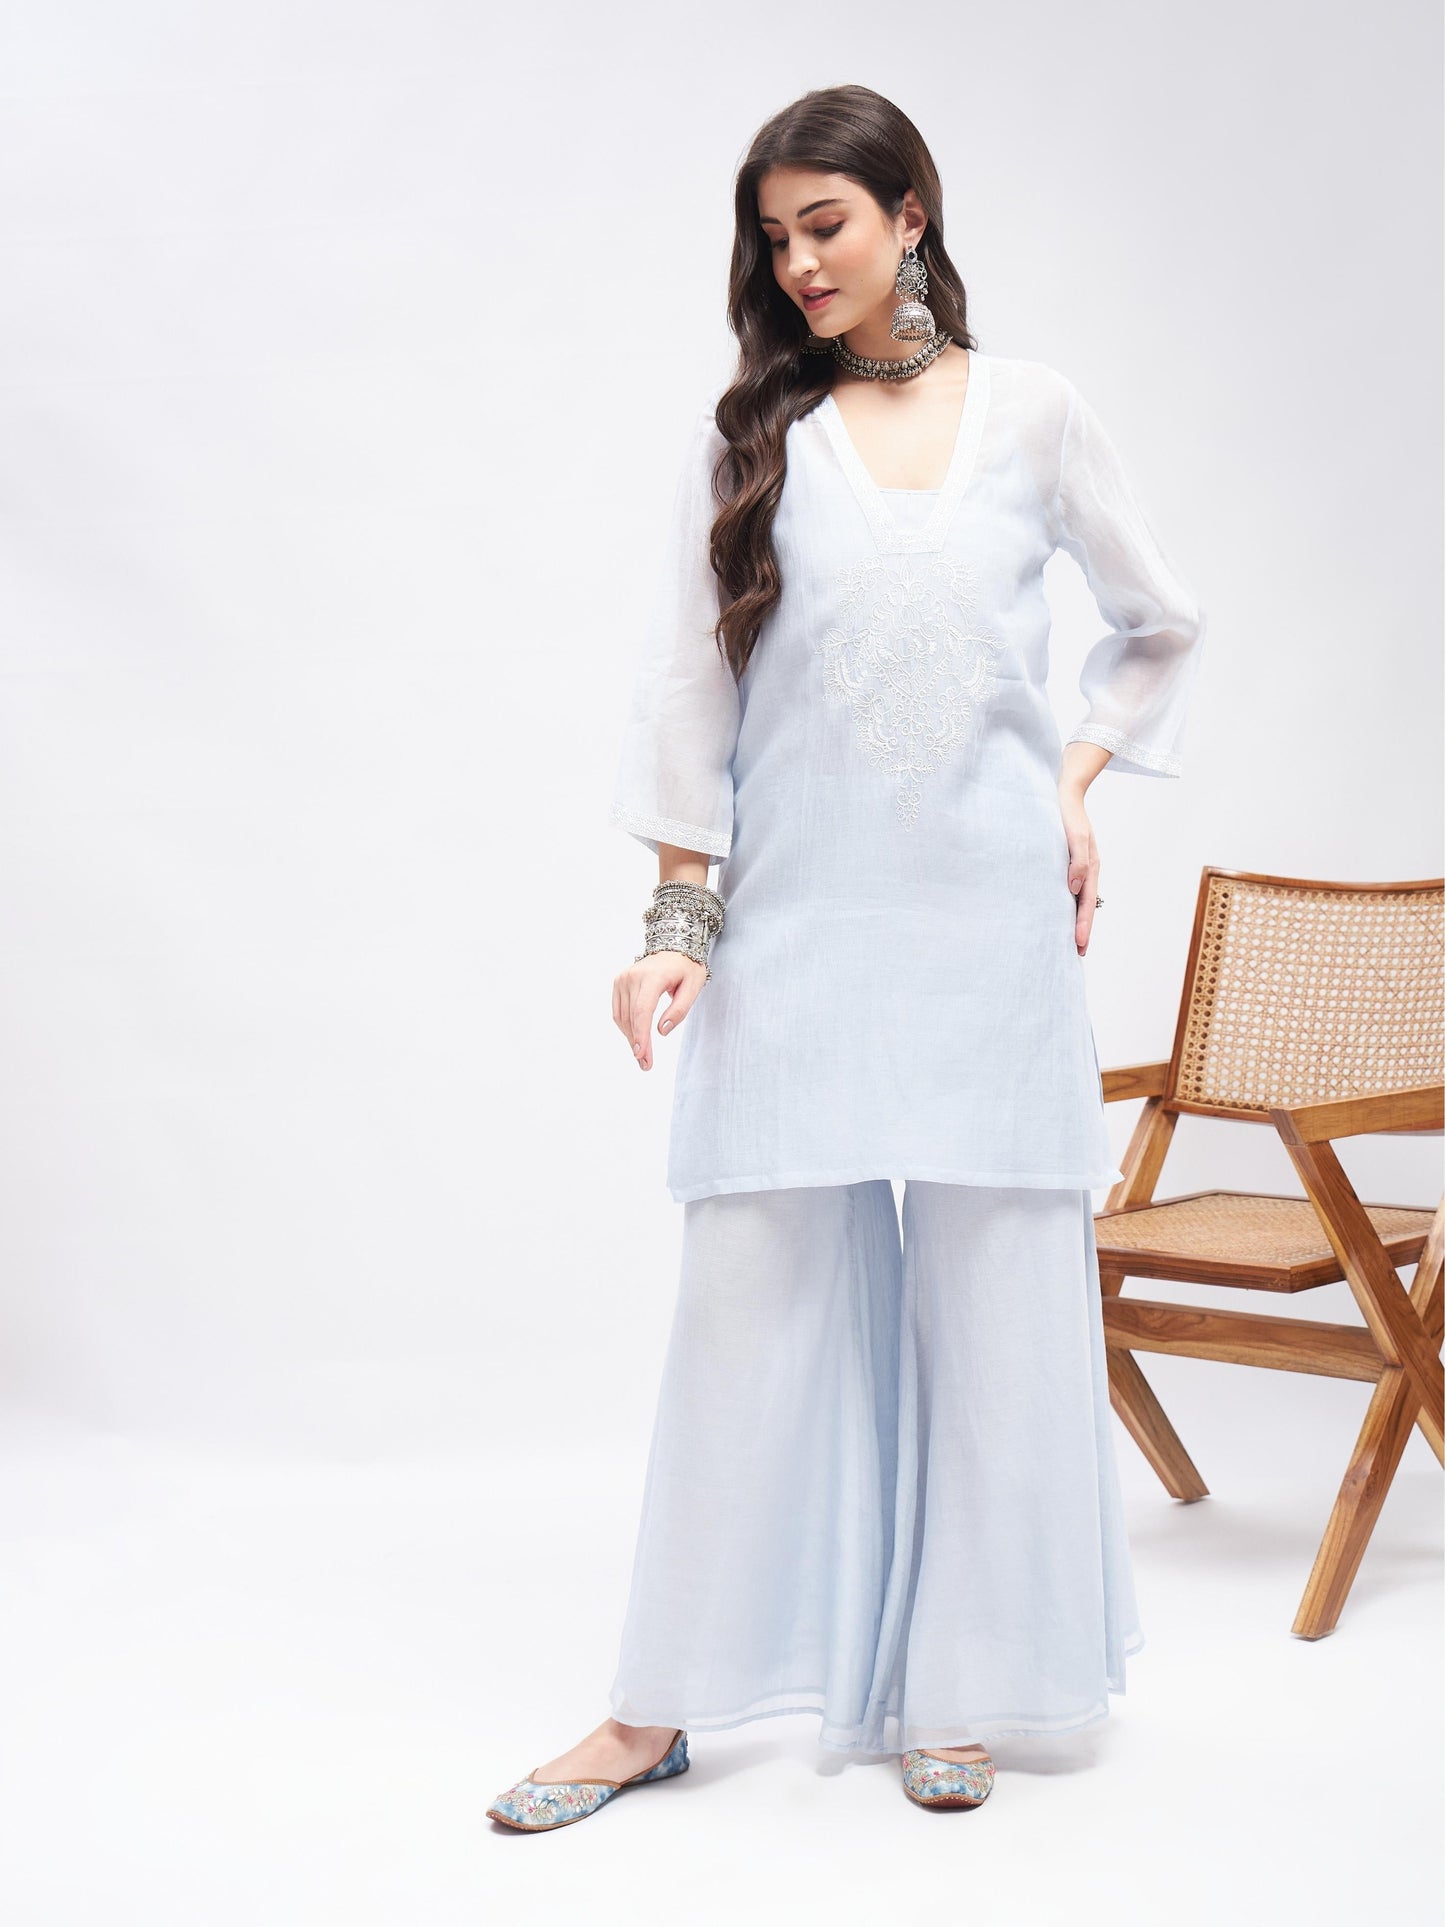 Blue Resham Embroidered Chanderi Silk Kurta Set at Kamakhyaa by RoohbyRidhimaa. This item is Blue, Casual Wear, Cotton, Embroidered, Kurta Sets, Pure Silk Chanderi, Regular Fit, Resham, Resham Embroidered, Shrugs, Toxin free